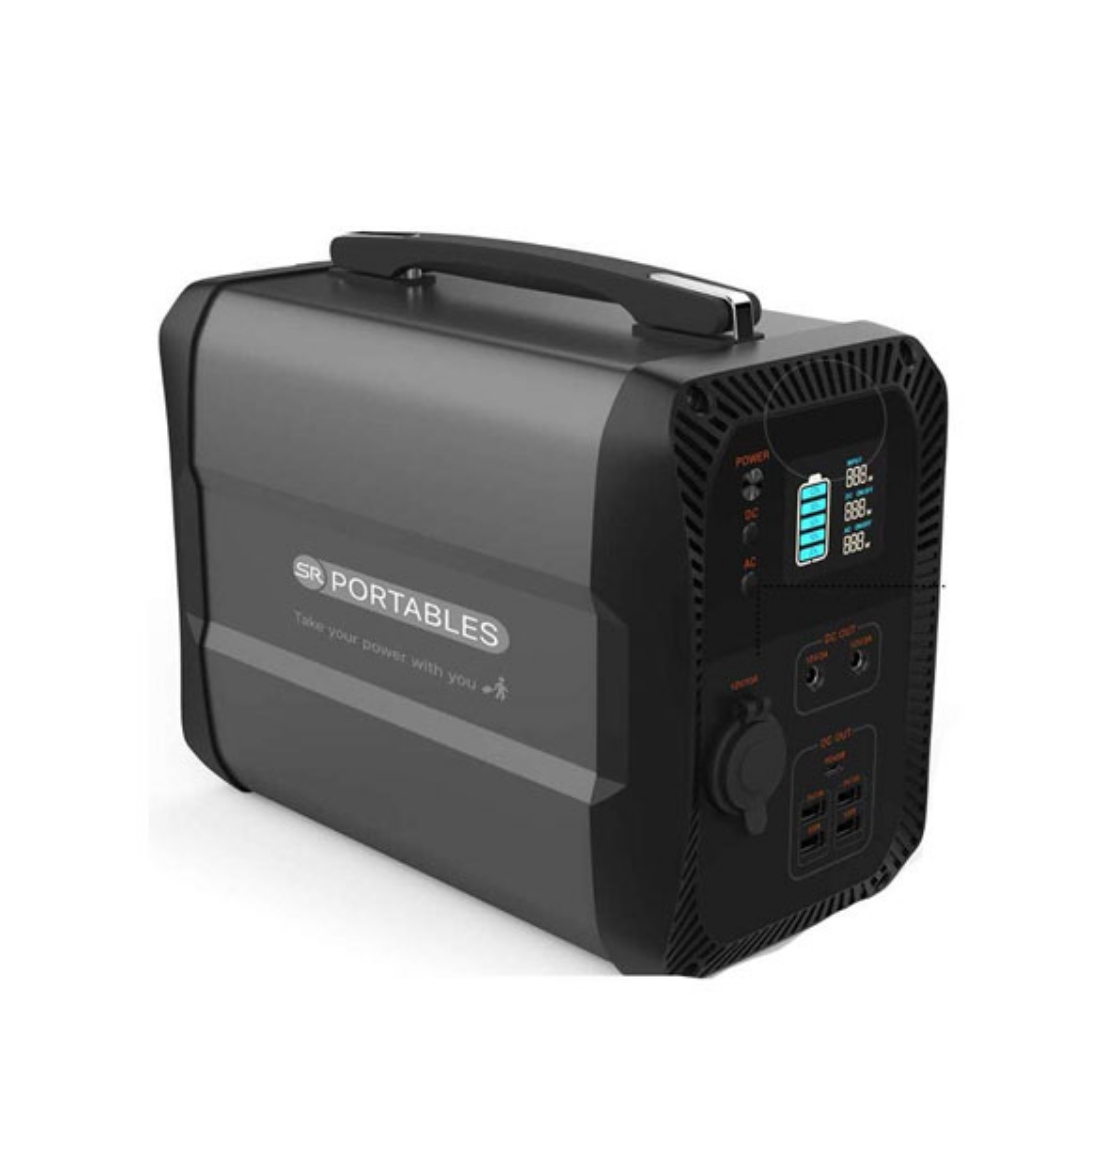 Picture of CLEO 416WH PORTABLE LITHIUM SOLAR GENERATOR (LITHIUM POWER BANK) - SR PORTABLES ( AUSTRALIAN MADE )